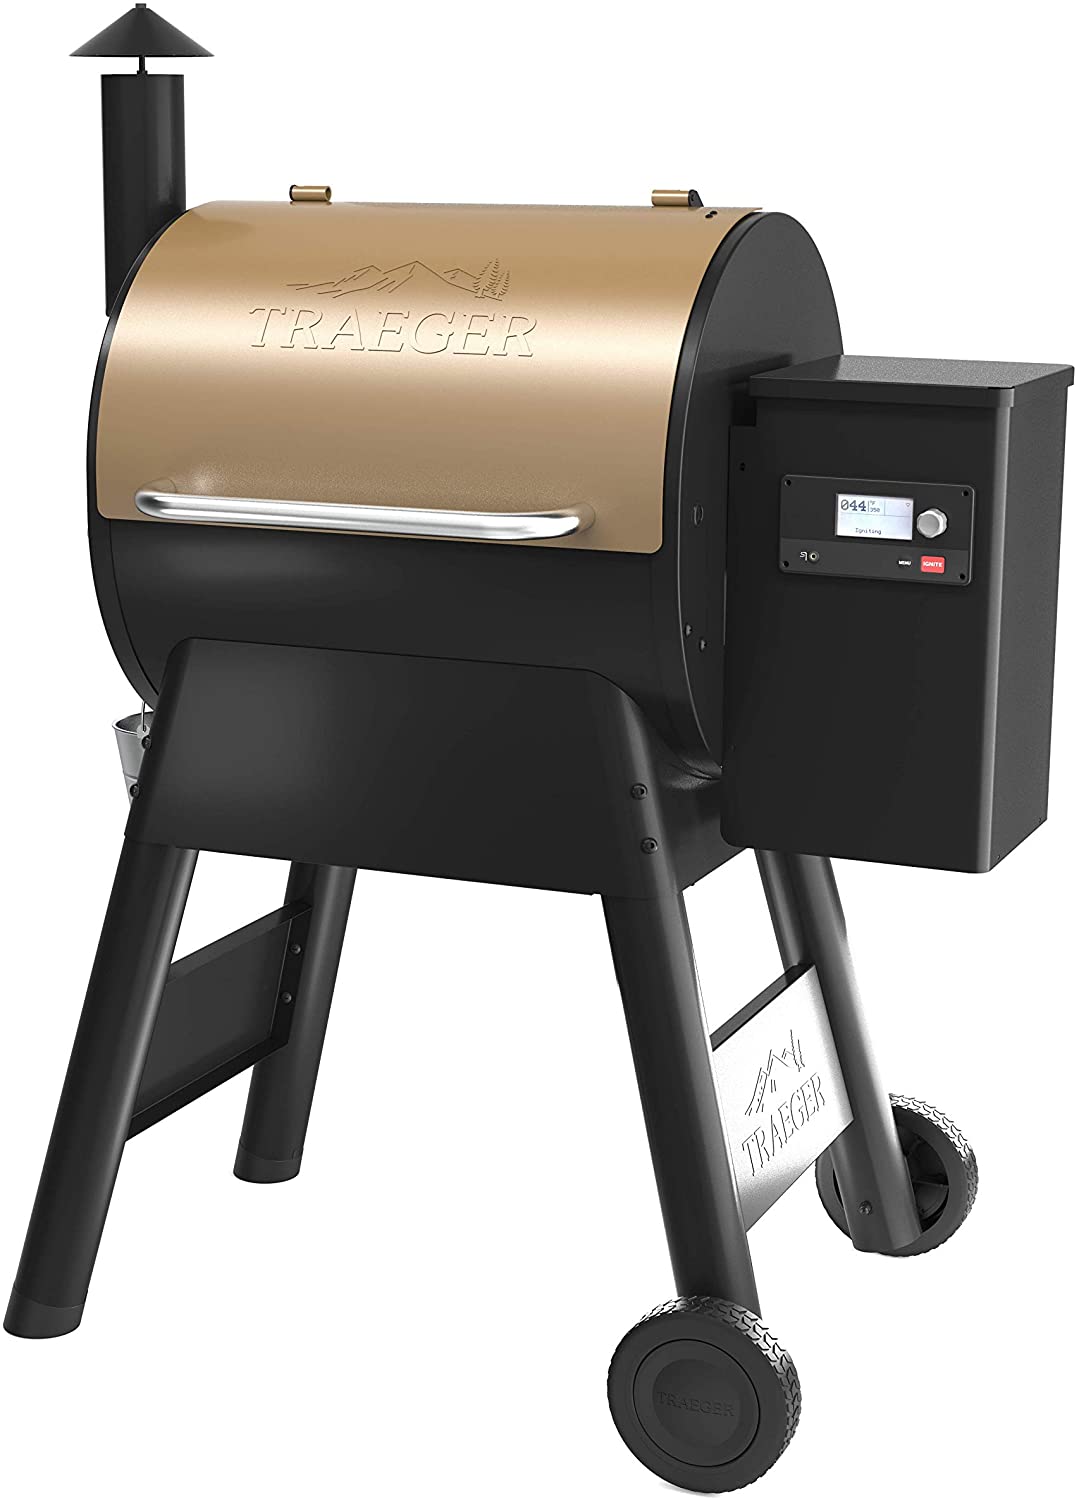 Traeger TFB57GZEO Pro Series 575 Grill (Best Pellet Grill Under 700)